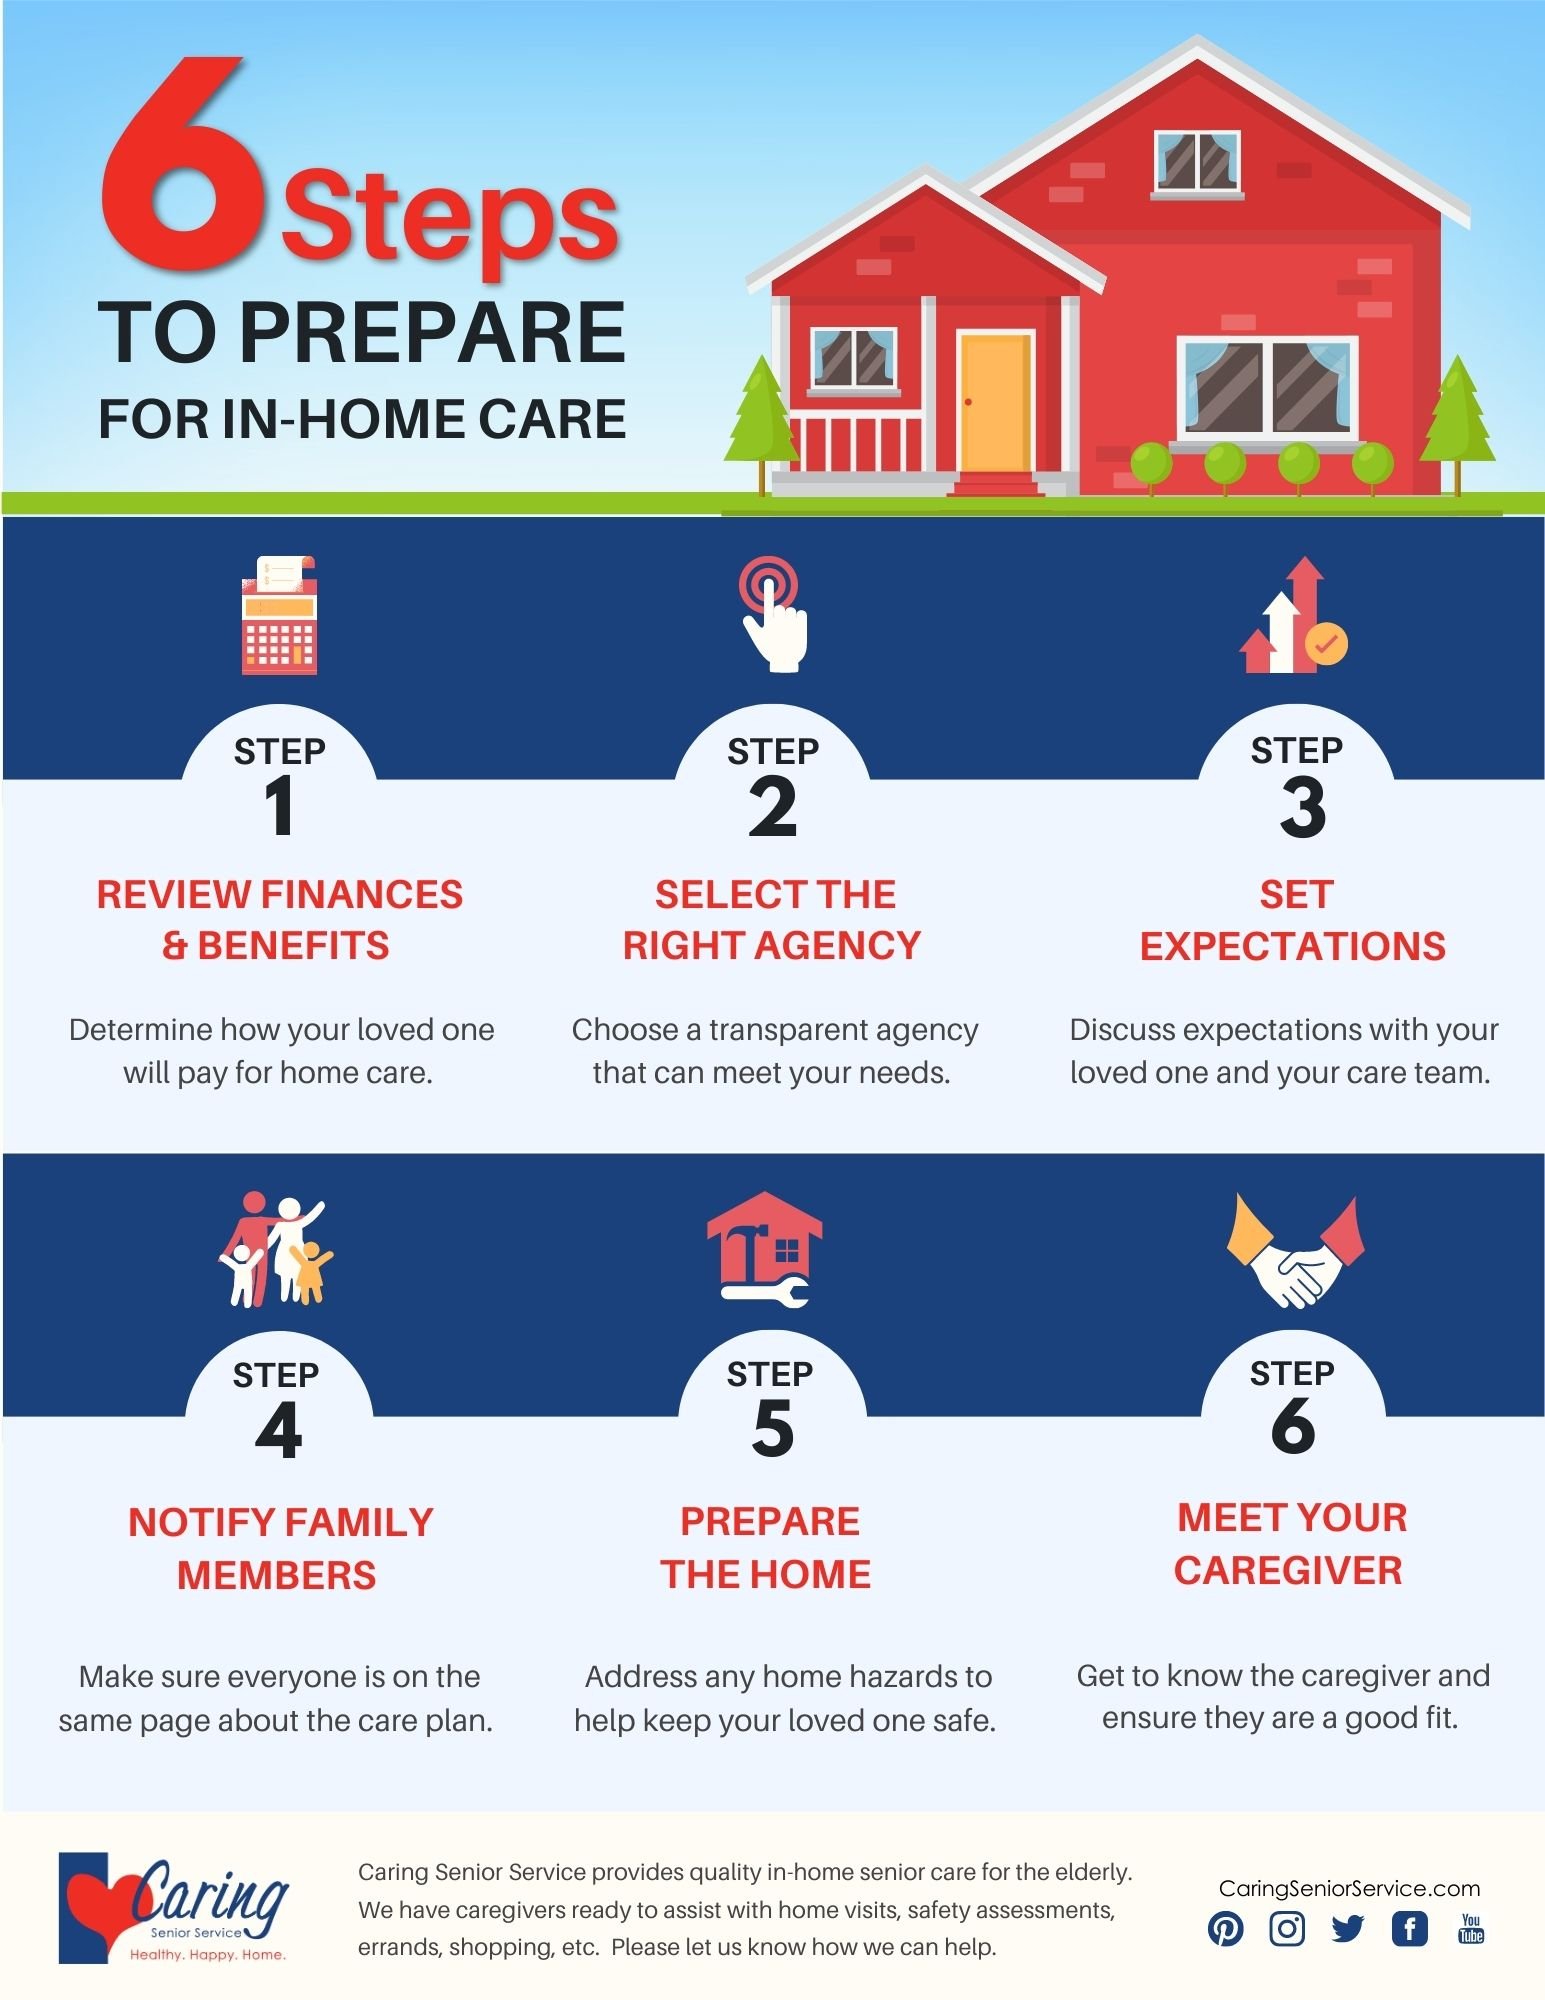 https://www.caringseniorservice.com/hs-fs/hubfs/Infographics/Steps%20to%20Prepare%20for%20In-Home%20Care%20Infographic%20Vertical.jpg?width=1545&height=2000&name=Steps%20to%20Prepare%20for%20In-Home%20Care%20Infographic%20Vertical.jpg